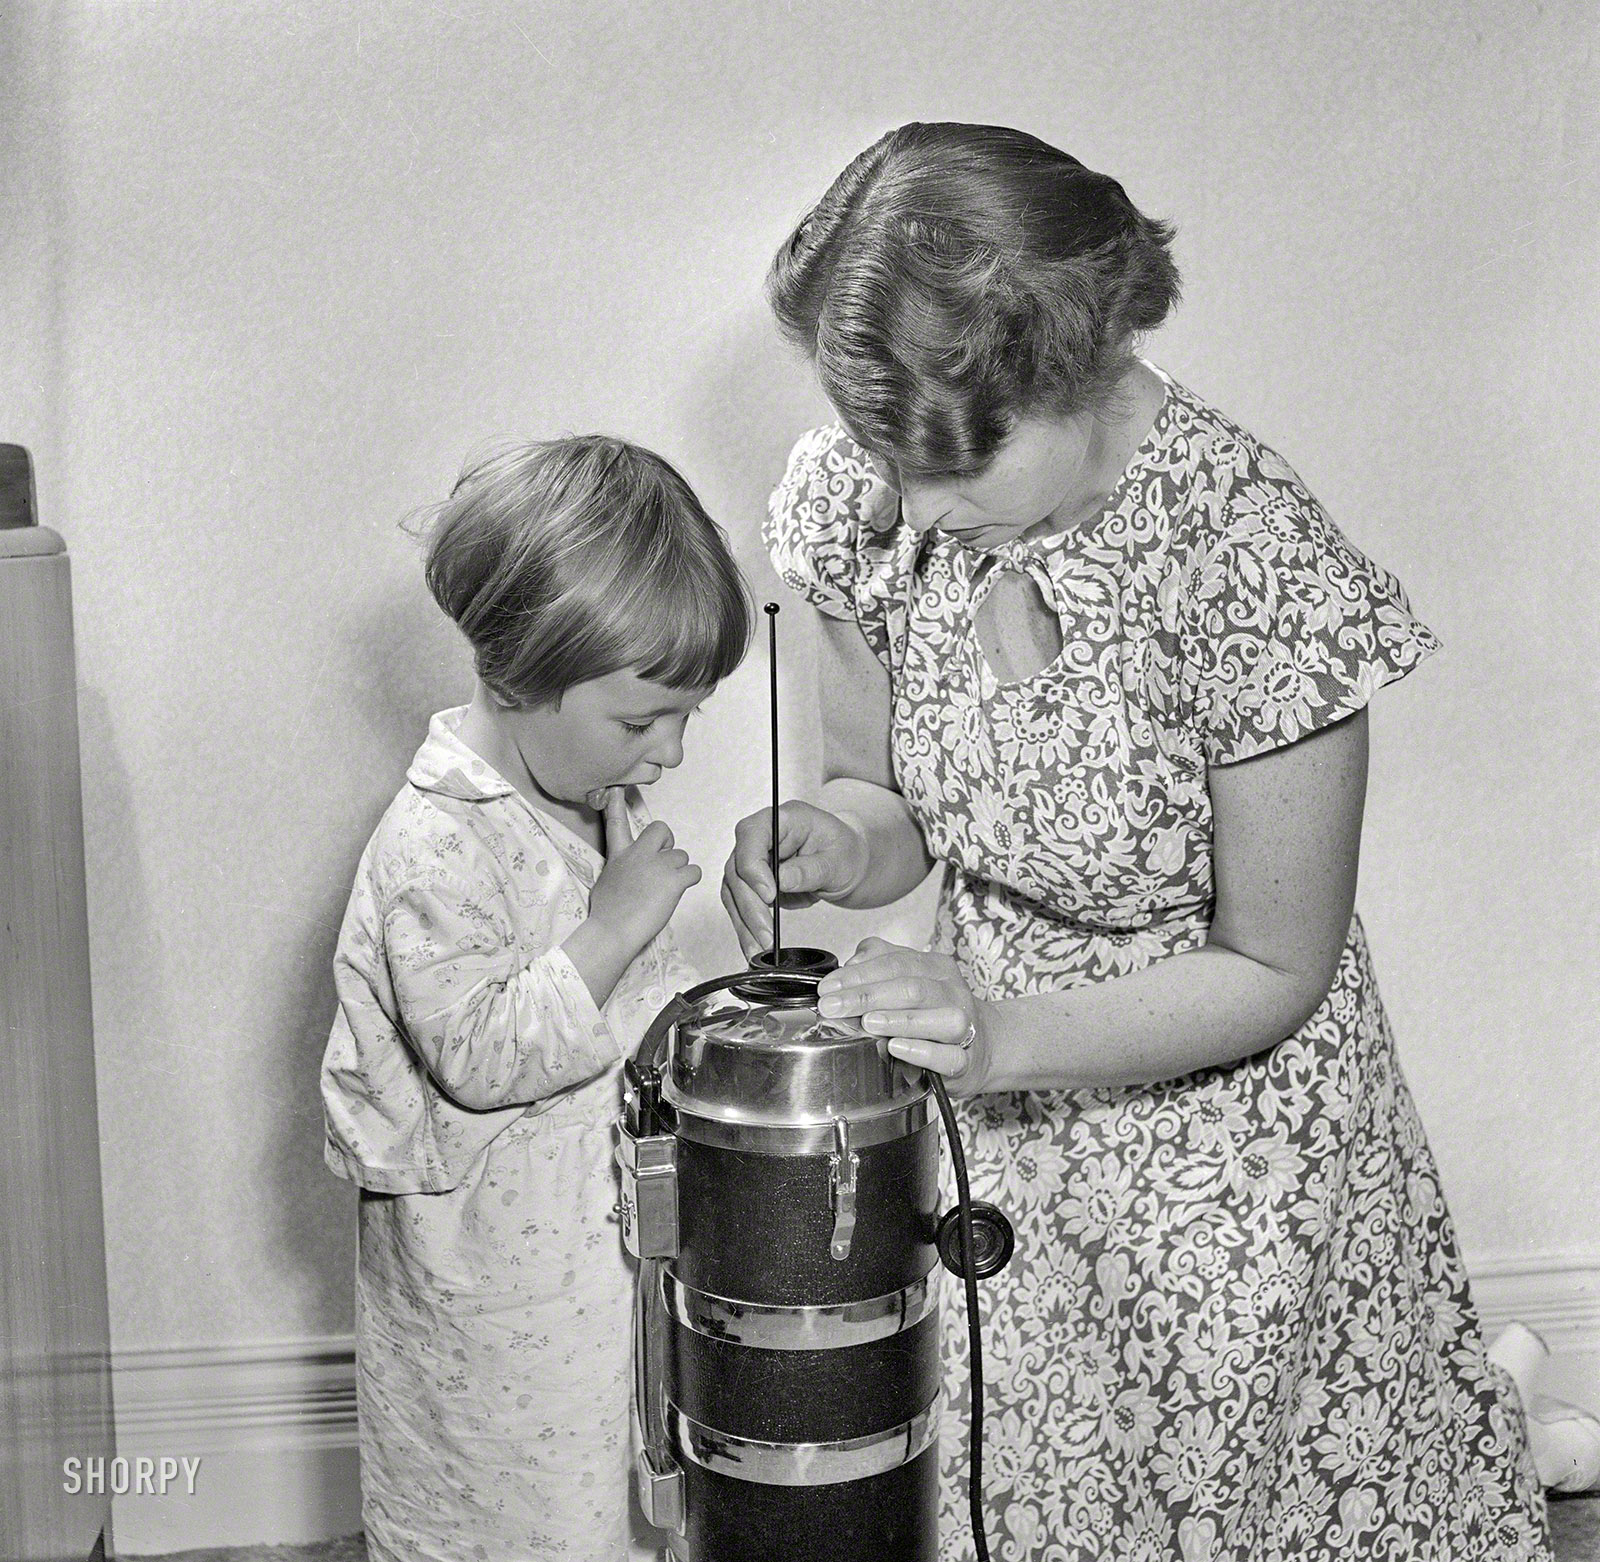 Jan. 19, 1951. "Common accidents in the home." A sentiment open to a number of interpretations. Wellington, New Zealand, Evening Post photo. View full size.